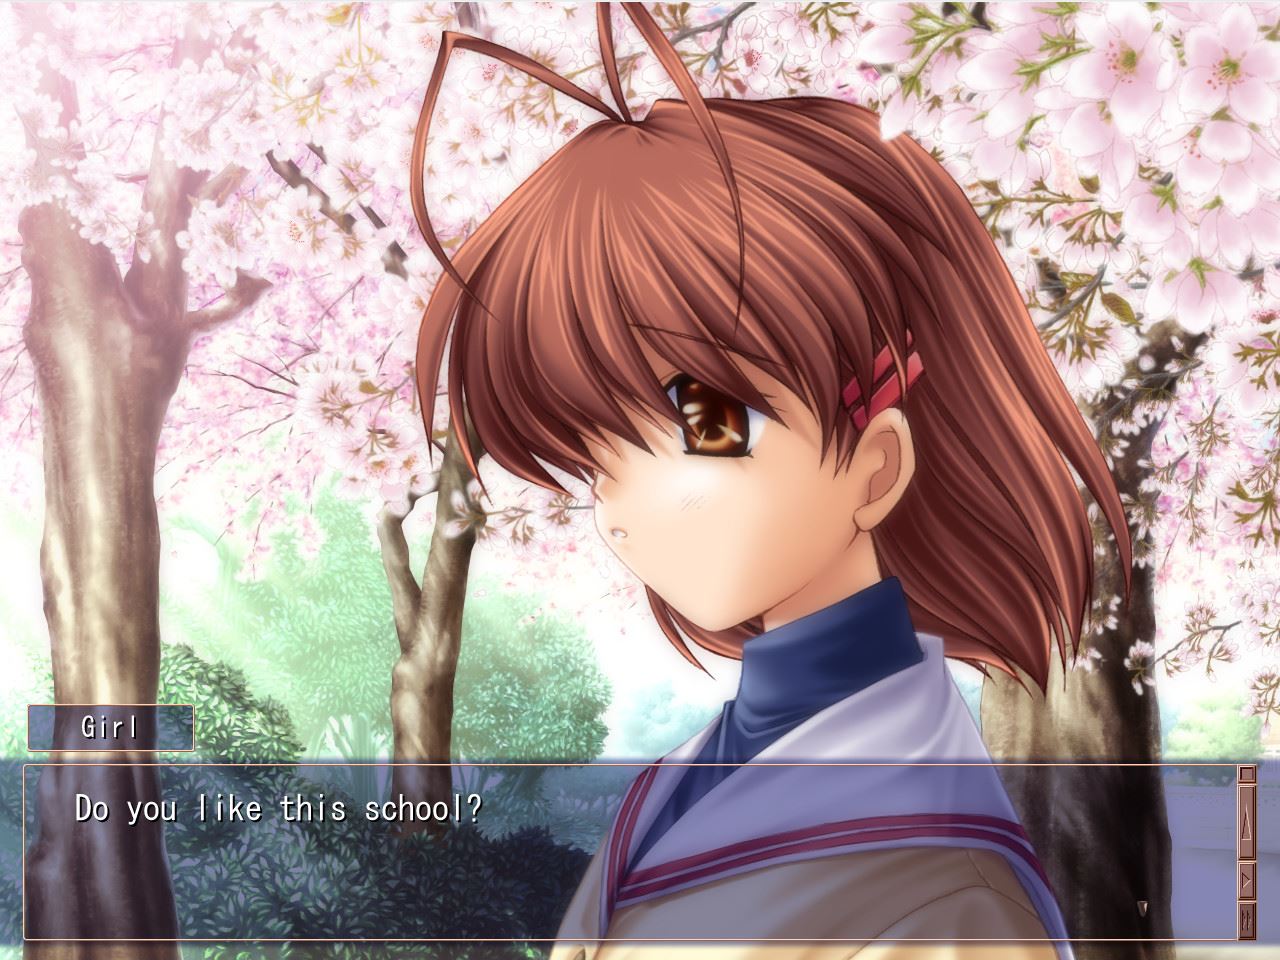 Clannad Porn - Clannad Others Porn Sex Game v.1.6.7.3 Download for Windows